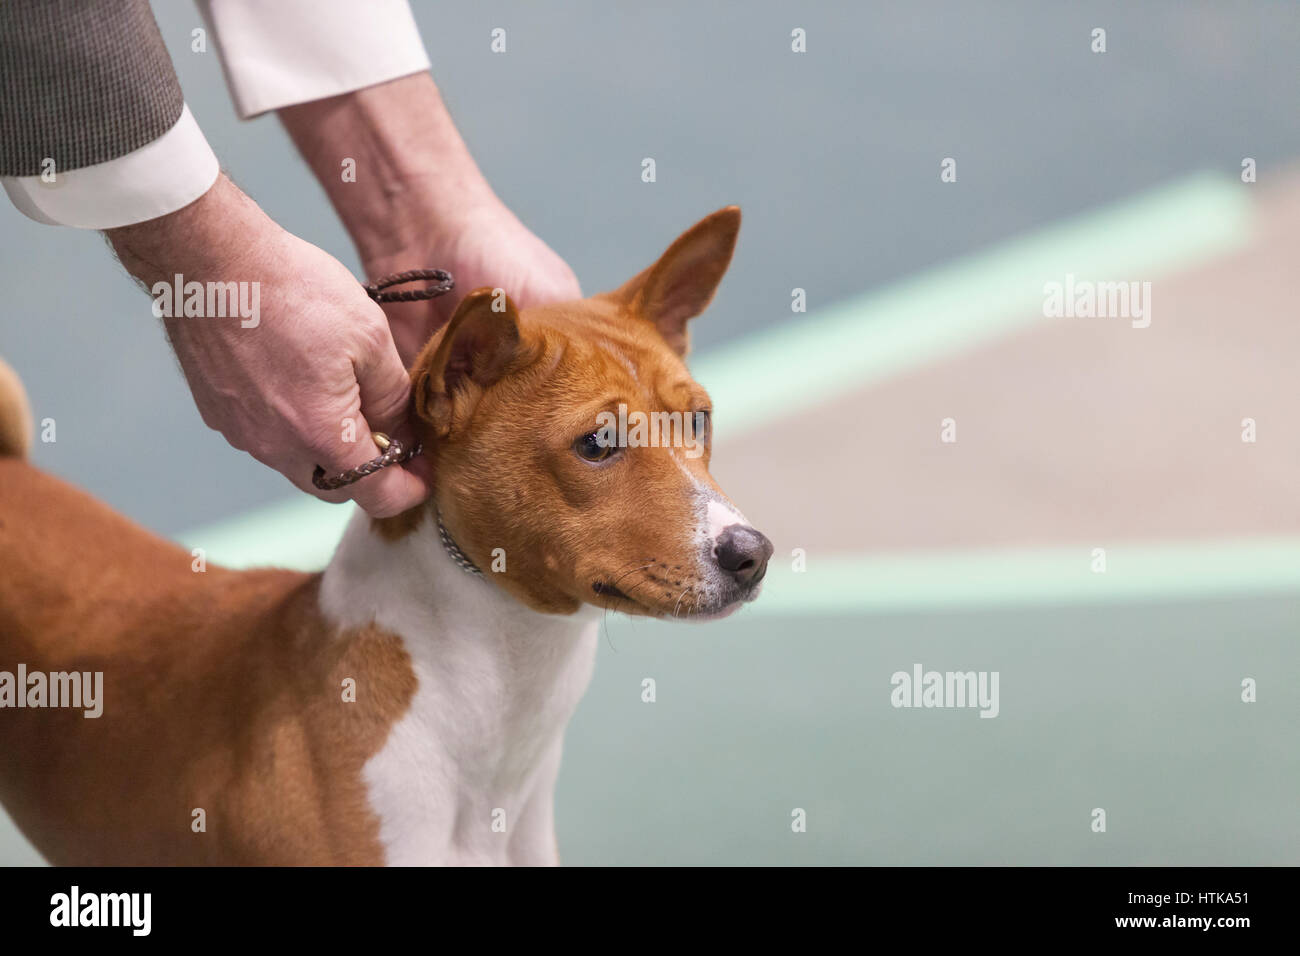 Seattle, Washington DC, USA. 11th March 2017. A Portuguese Podengo Pequeno in the ring at the 2017 Seattle Kennel Club Dog Show. Approximately 160 different breeds participate in the annual All-Breed dog show at CenturyLink Field Event Center. Credit: Paul Gordon/Alamy Live News Stock Photo